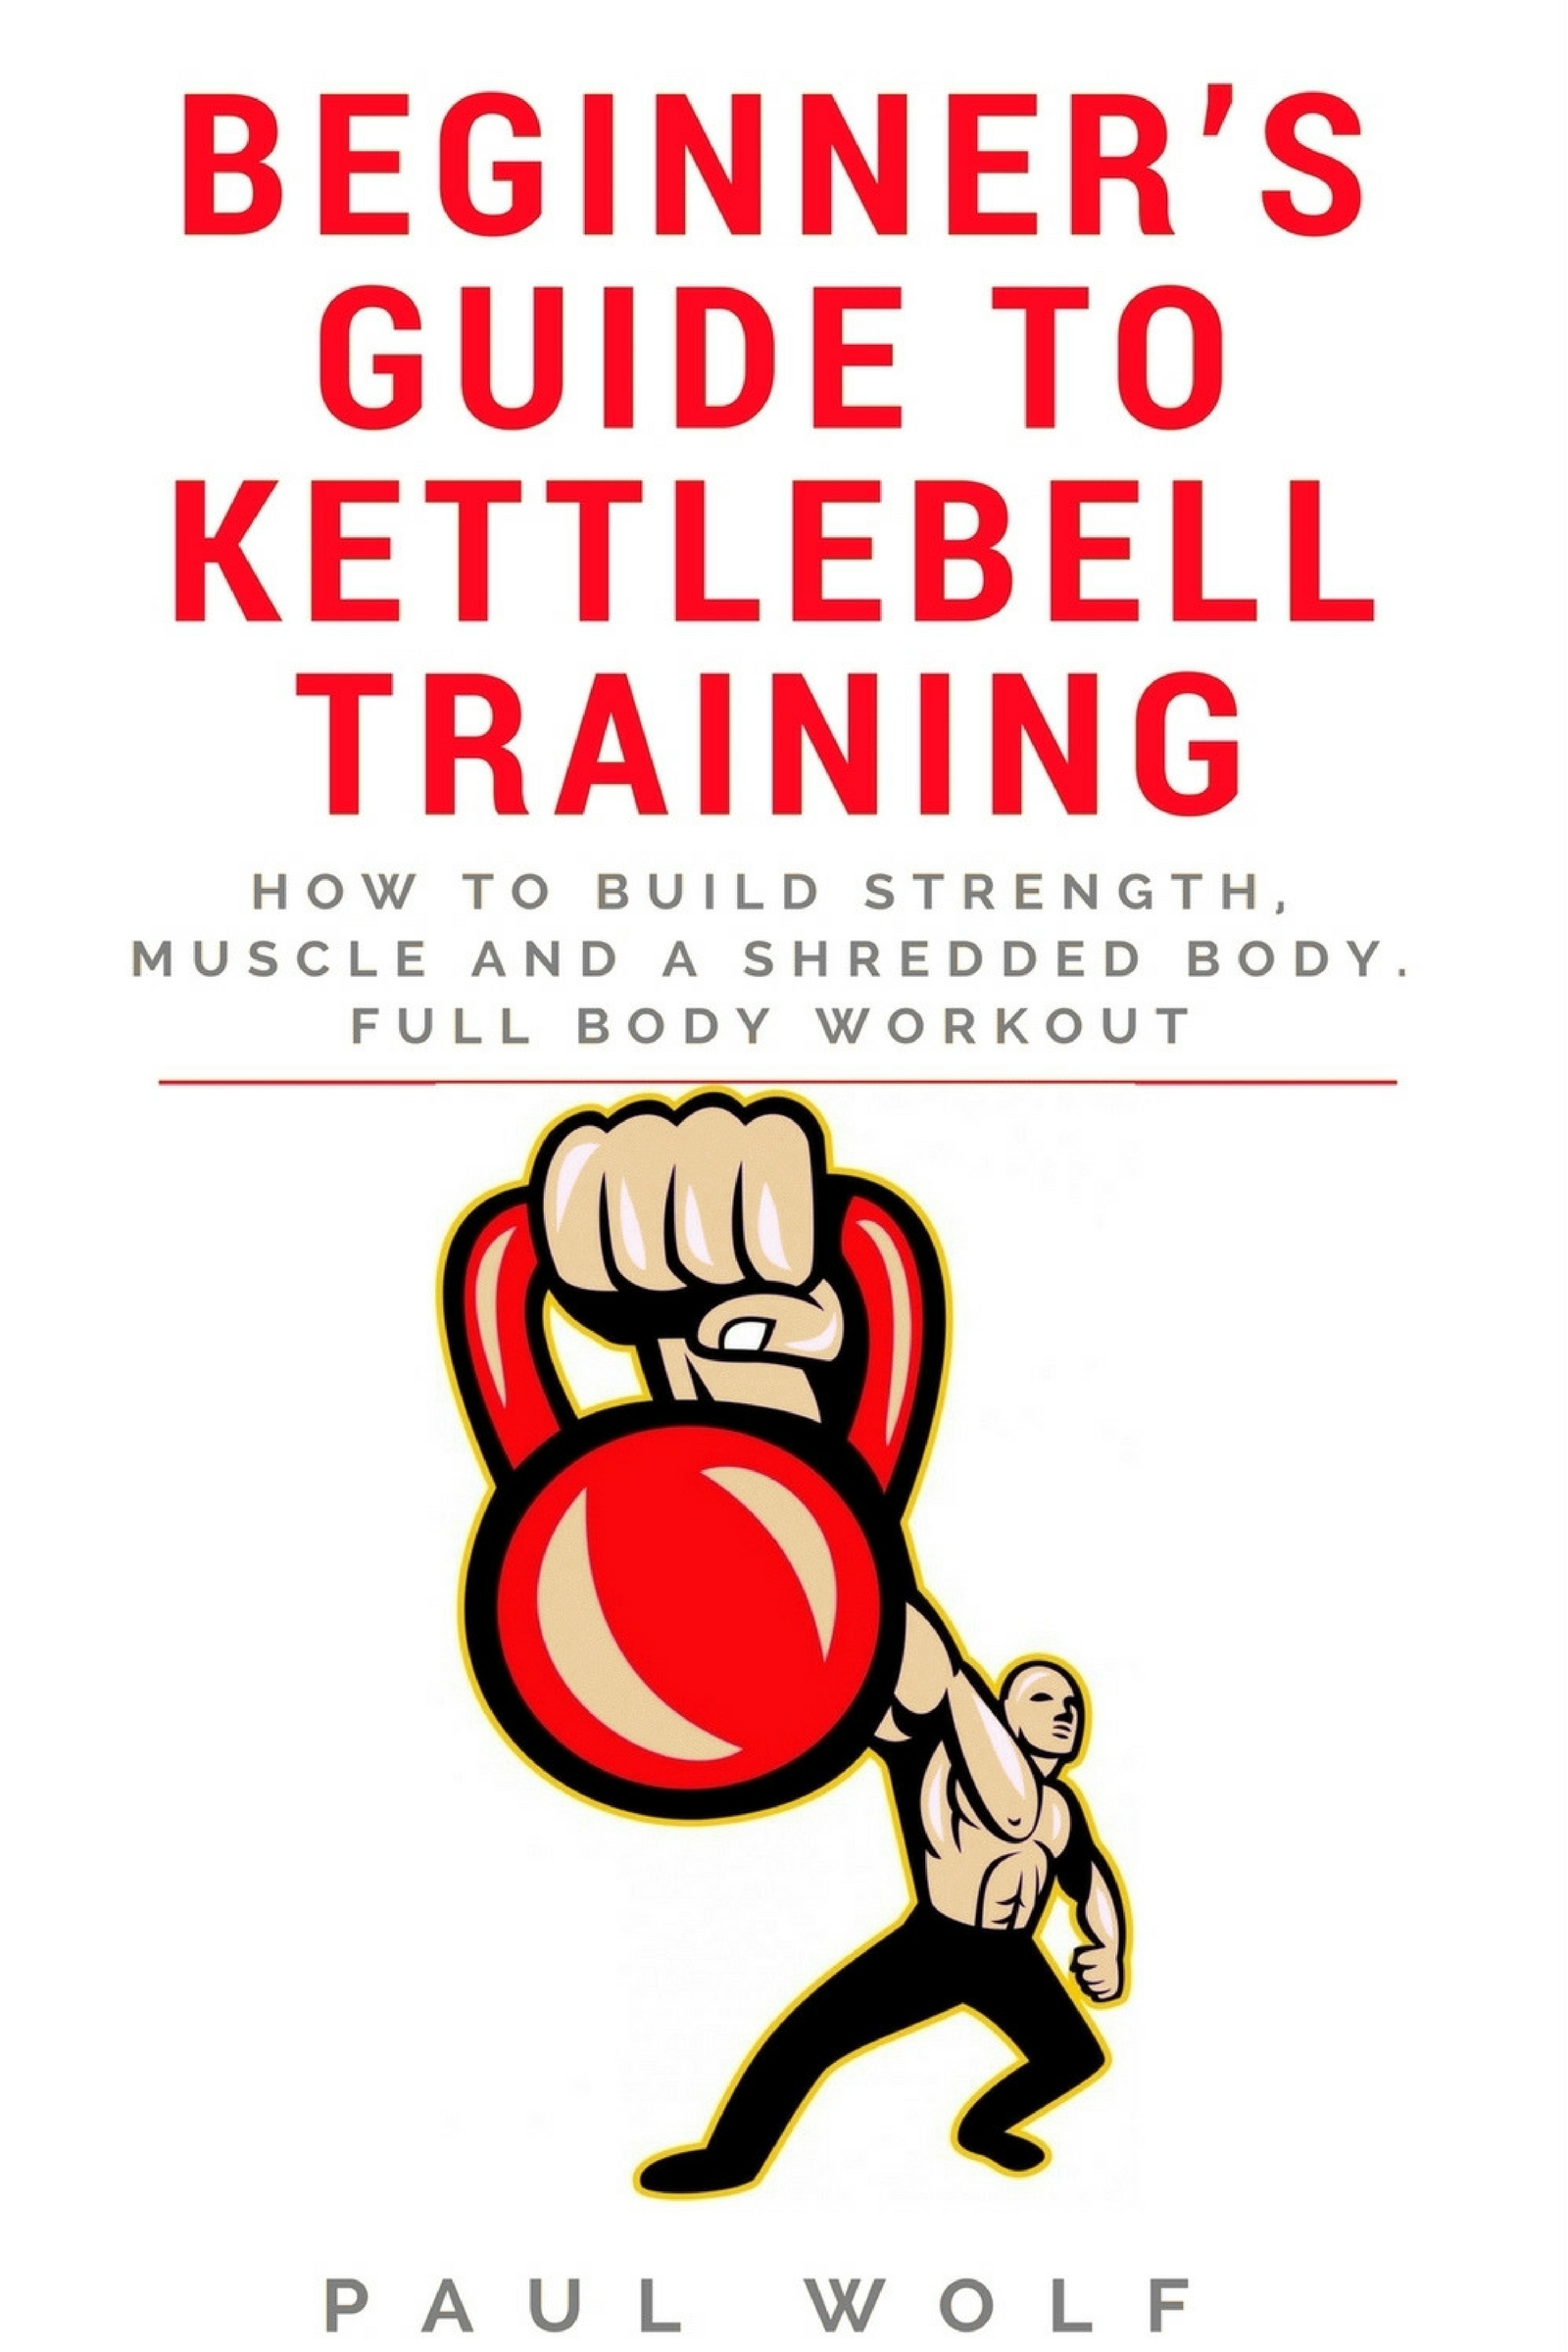 FREE: Beginner’s Guide To Kettlebell Training – How To Build Strength, Muscle And A Shredded Body. Full Body Workout by Paul Wolf